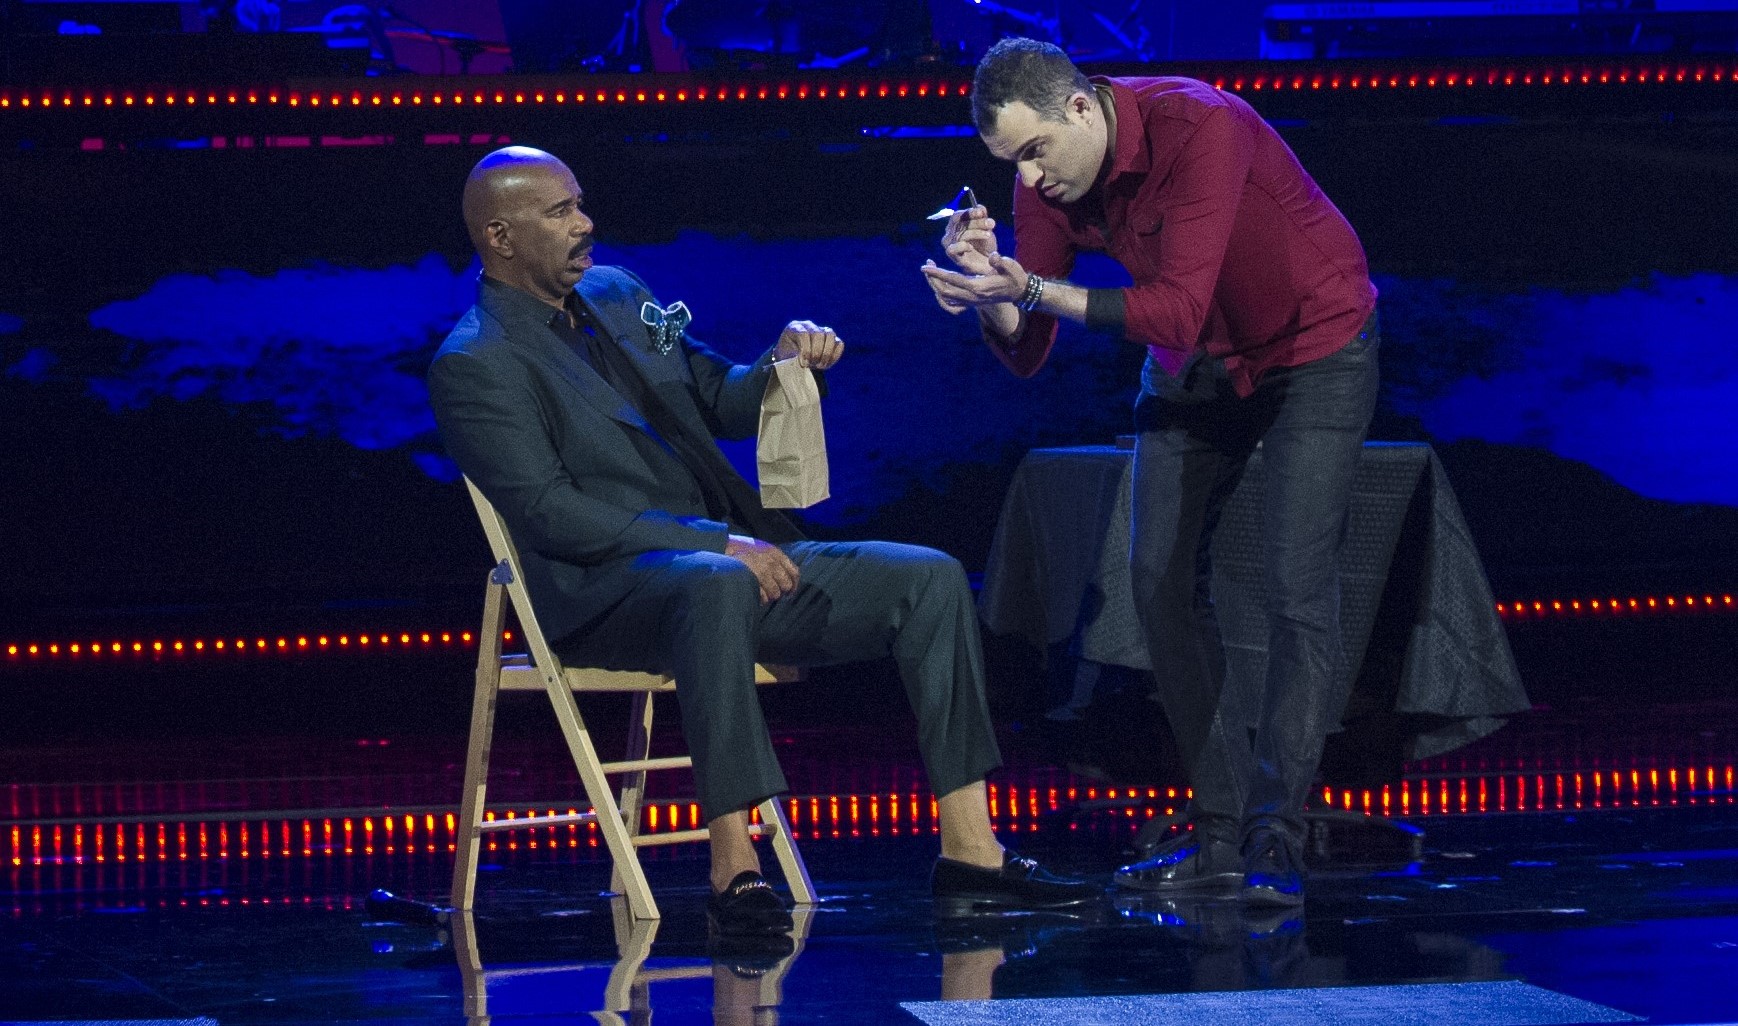 SHOWTIME AT THE APOLLO: L-R: Host Steve Harvey and contestant Spidey in the “Week 4” episode of SHOWTIME AT THE APOLLO airing Thursday, March 22 (9:00-10:00 PM ET/PT) on FOX. CR: Ben Hider / FOX. © 2018 / FOX Broadcasting.